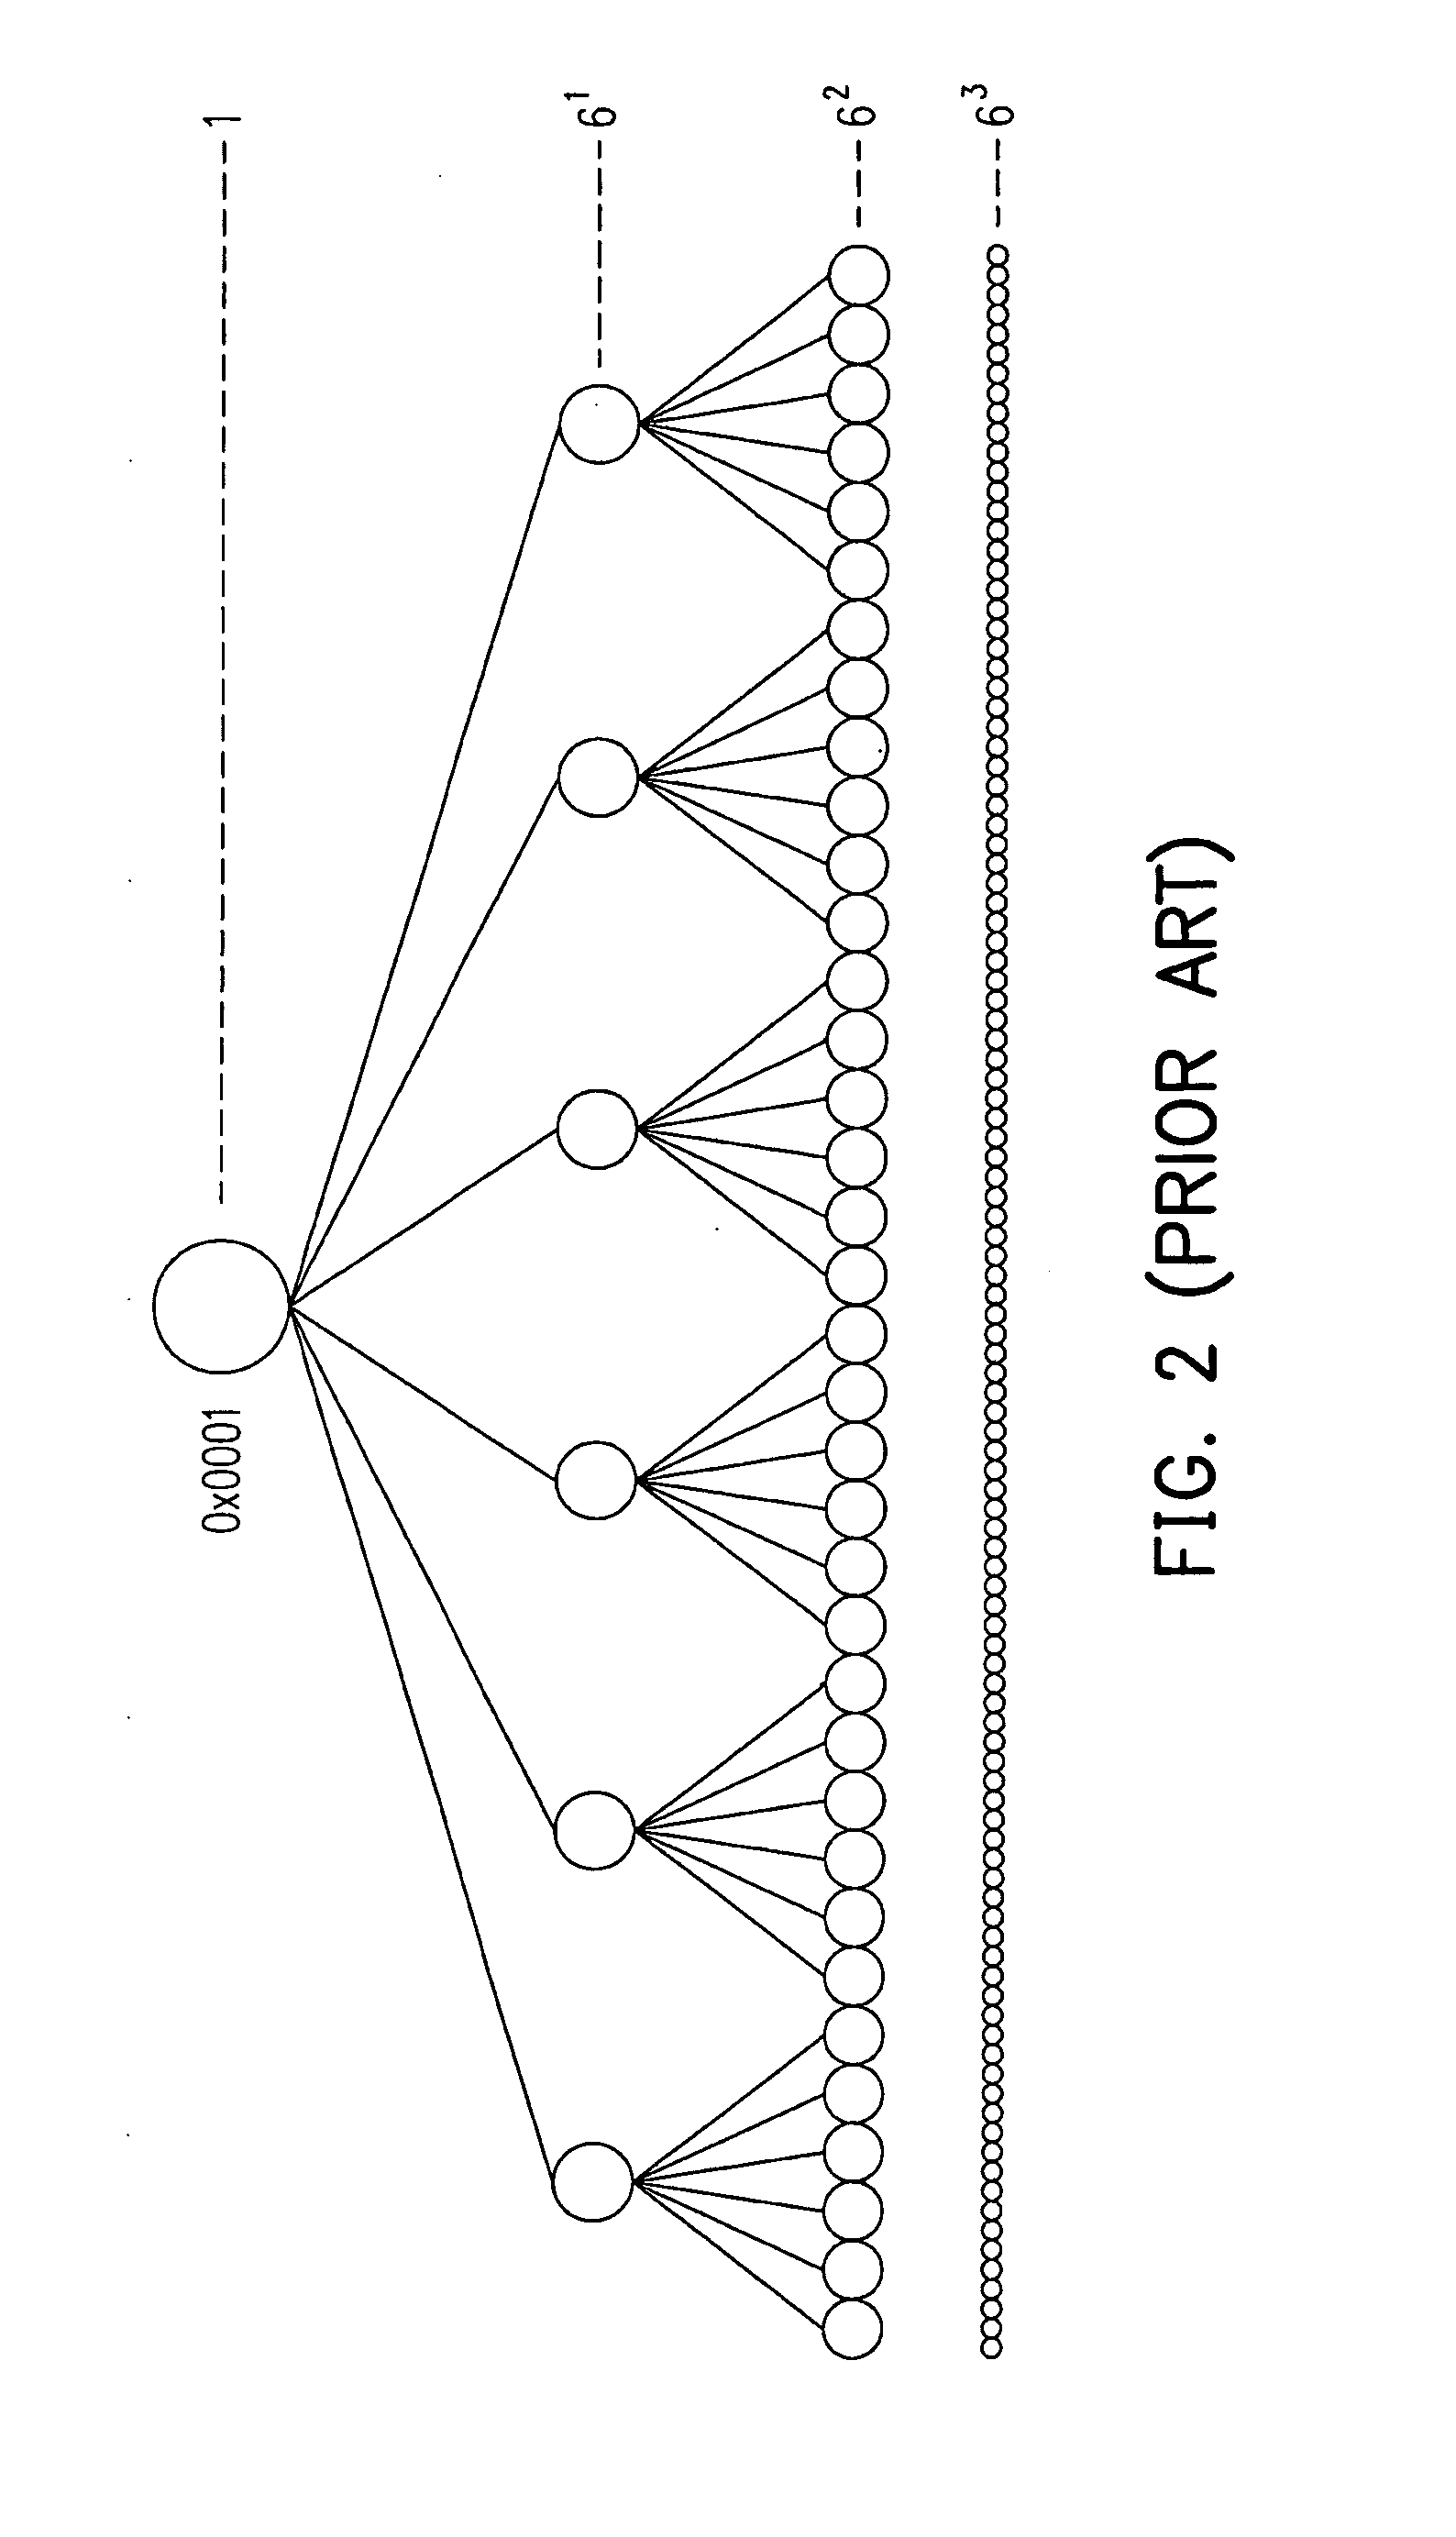 Network address assignment method and routing method for a long thin zigbee network